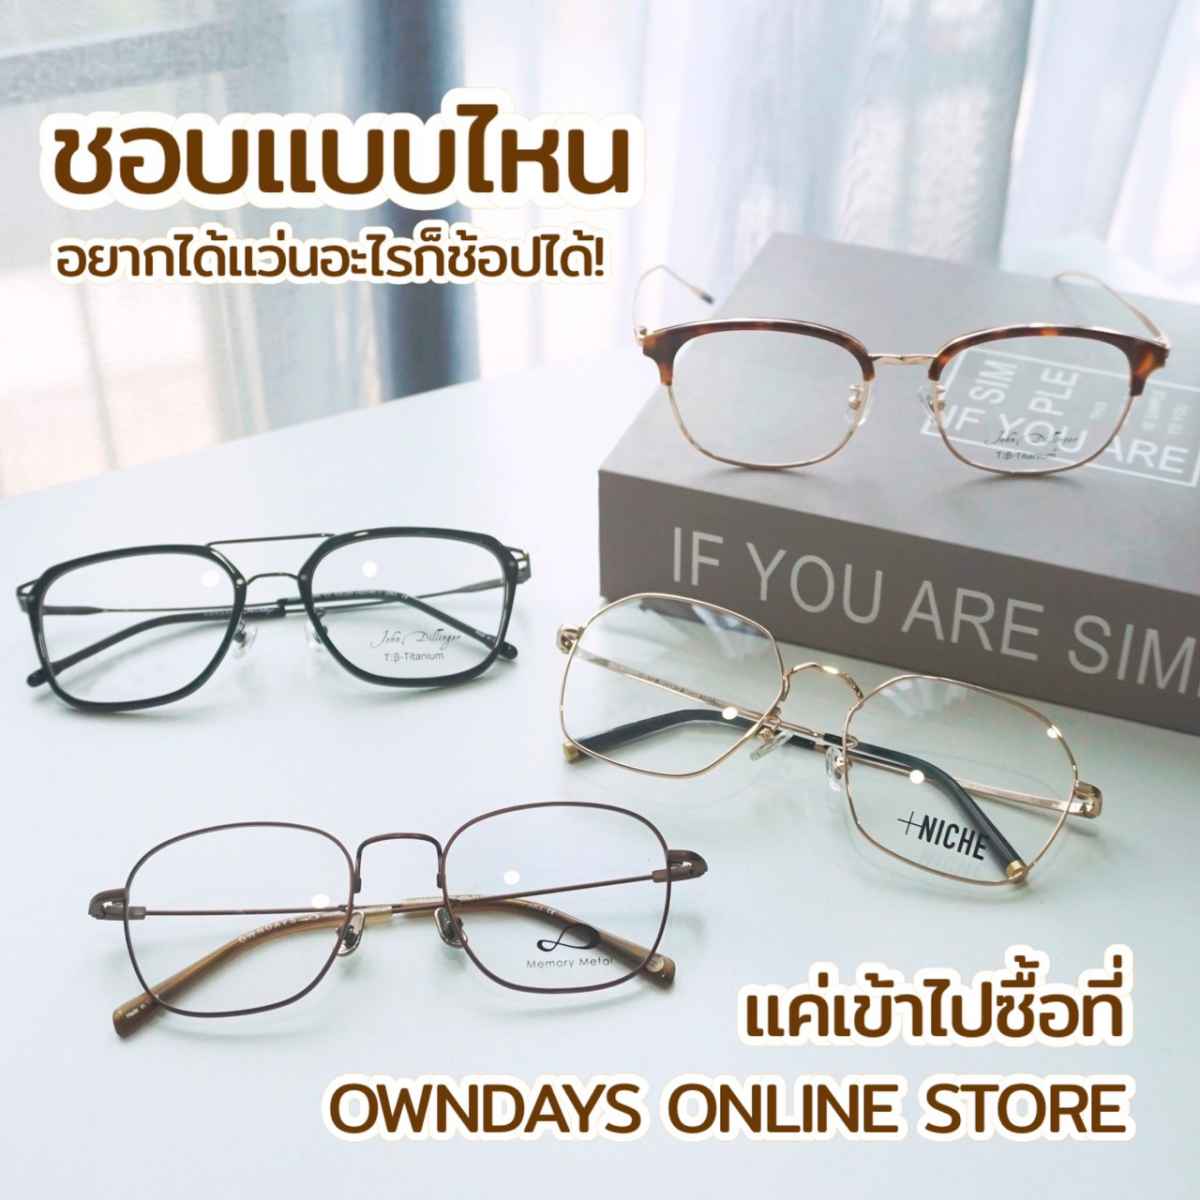 OWNDAYS ONLINE STORE